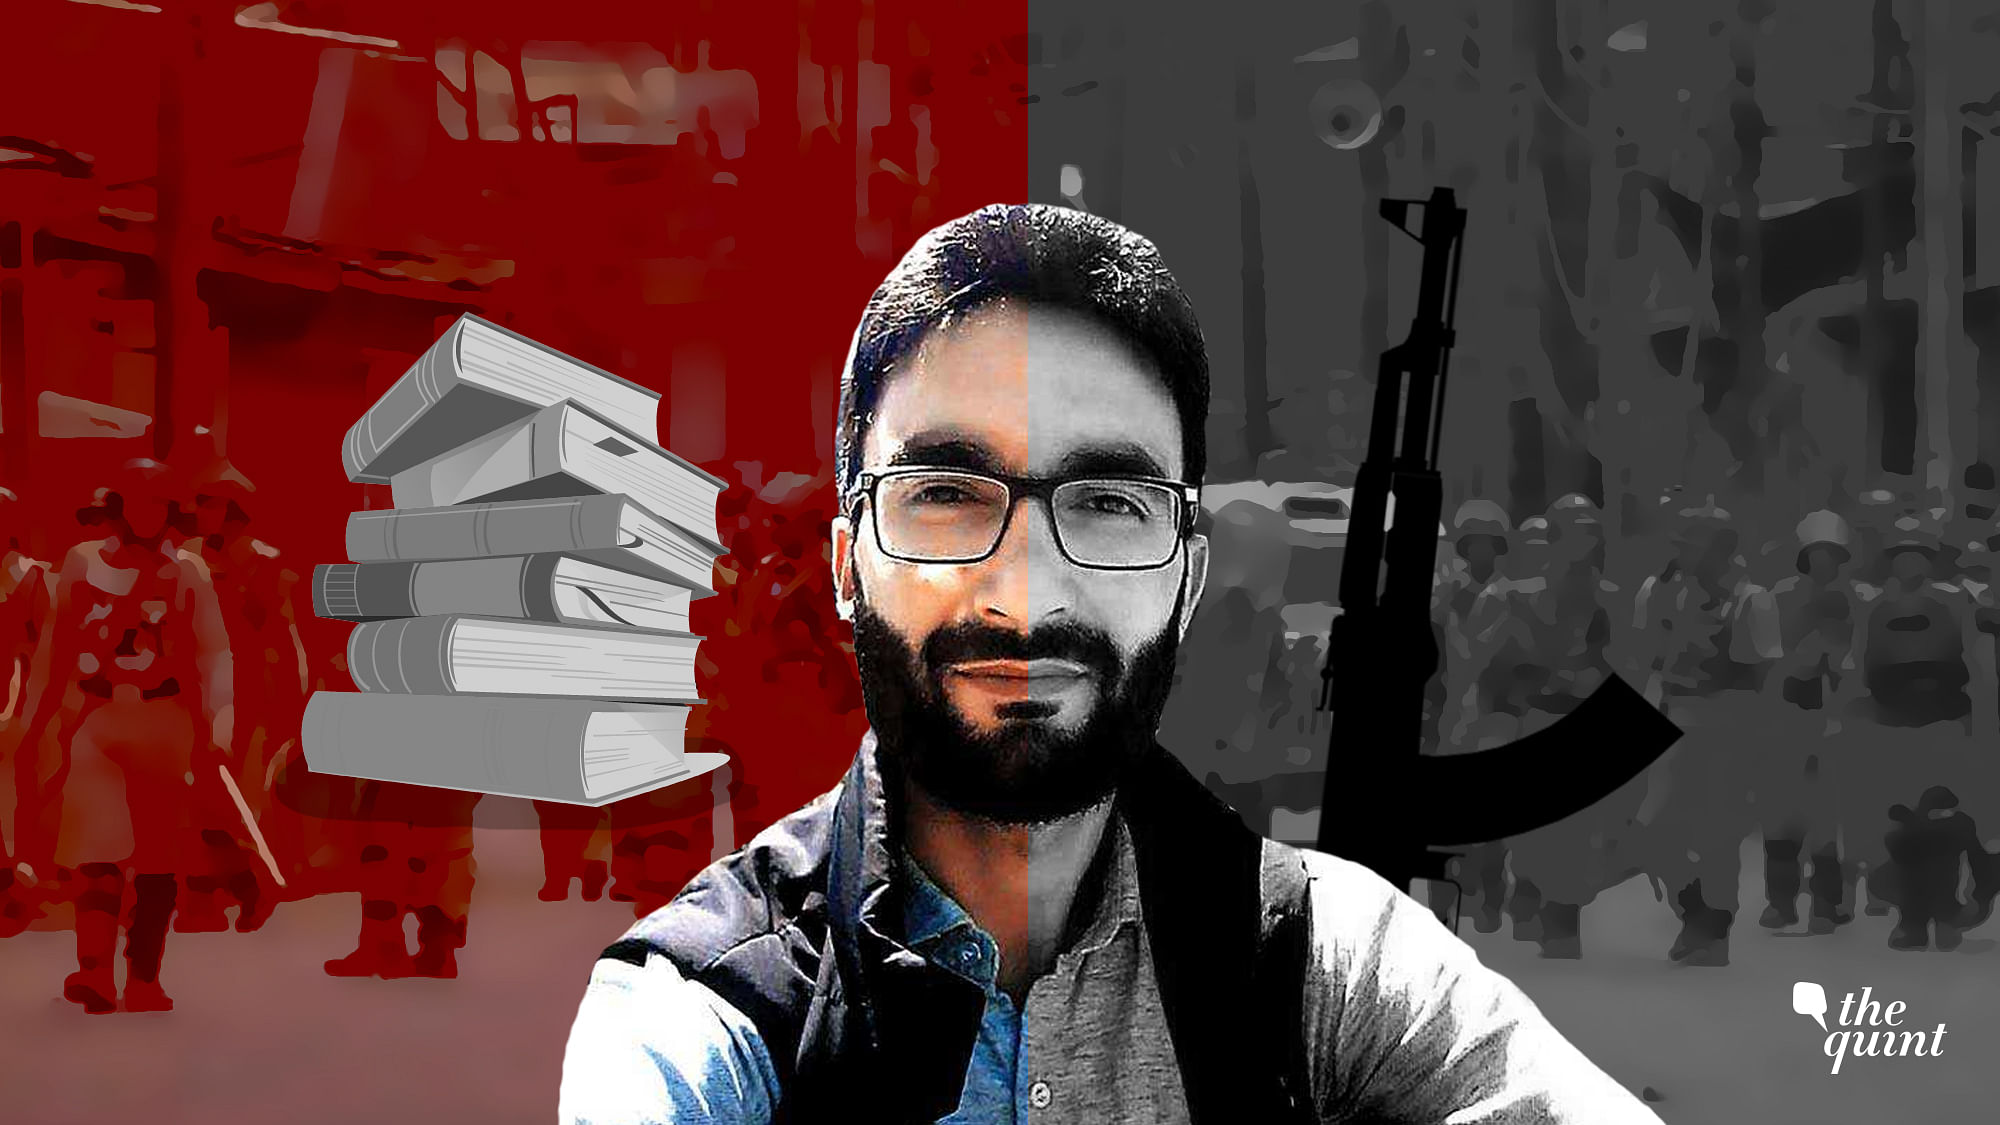 Mohammed Rafi Bhat was a humble, soft-spoken scholar who turned militant after witnessing the unrest in Kashmir, say his friends and colleagues.&nbsp;